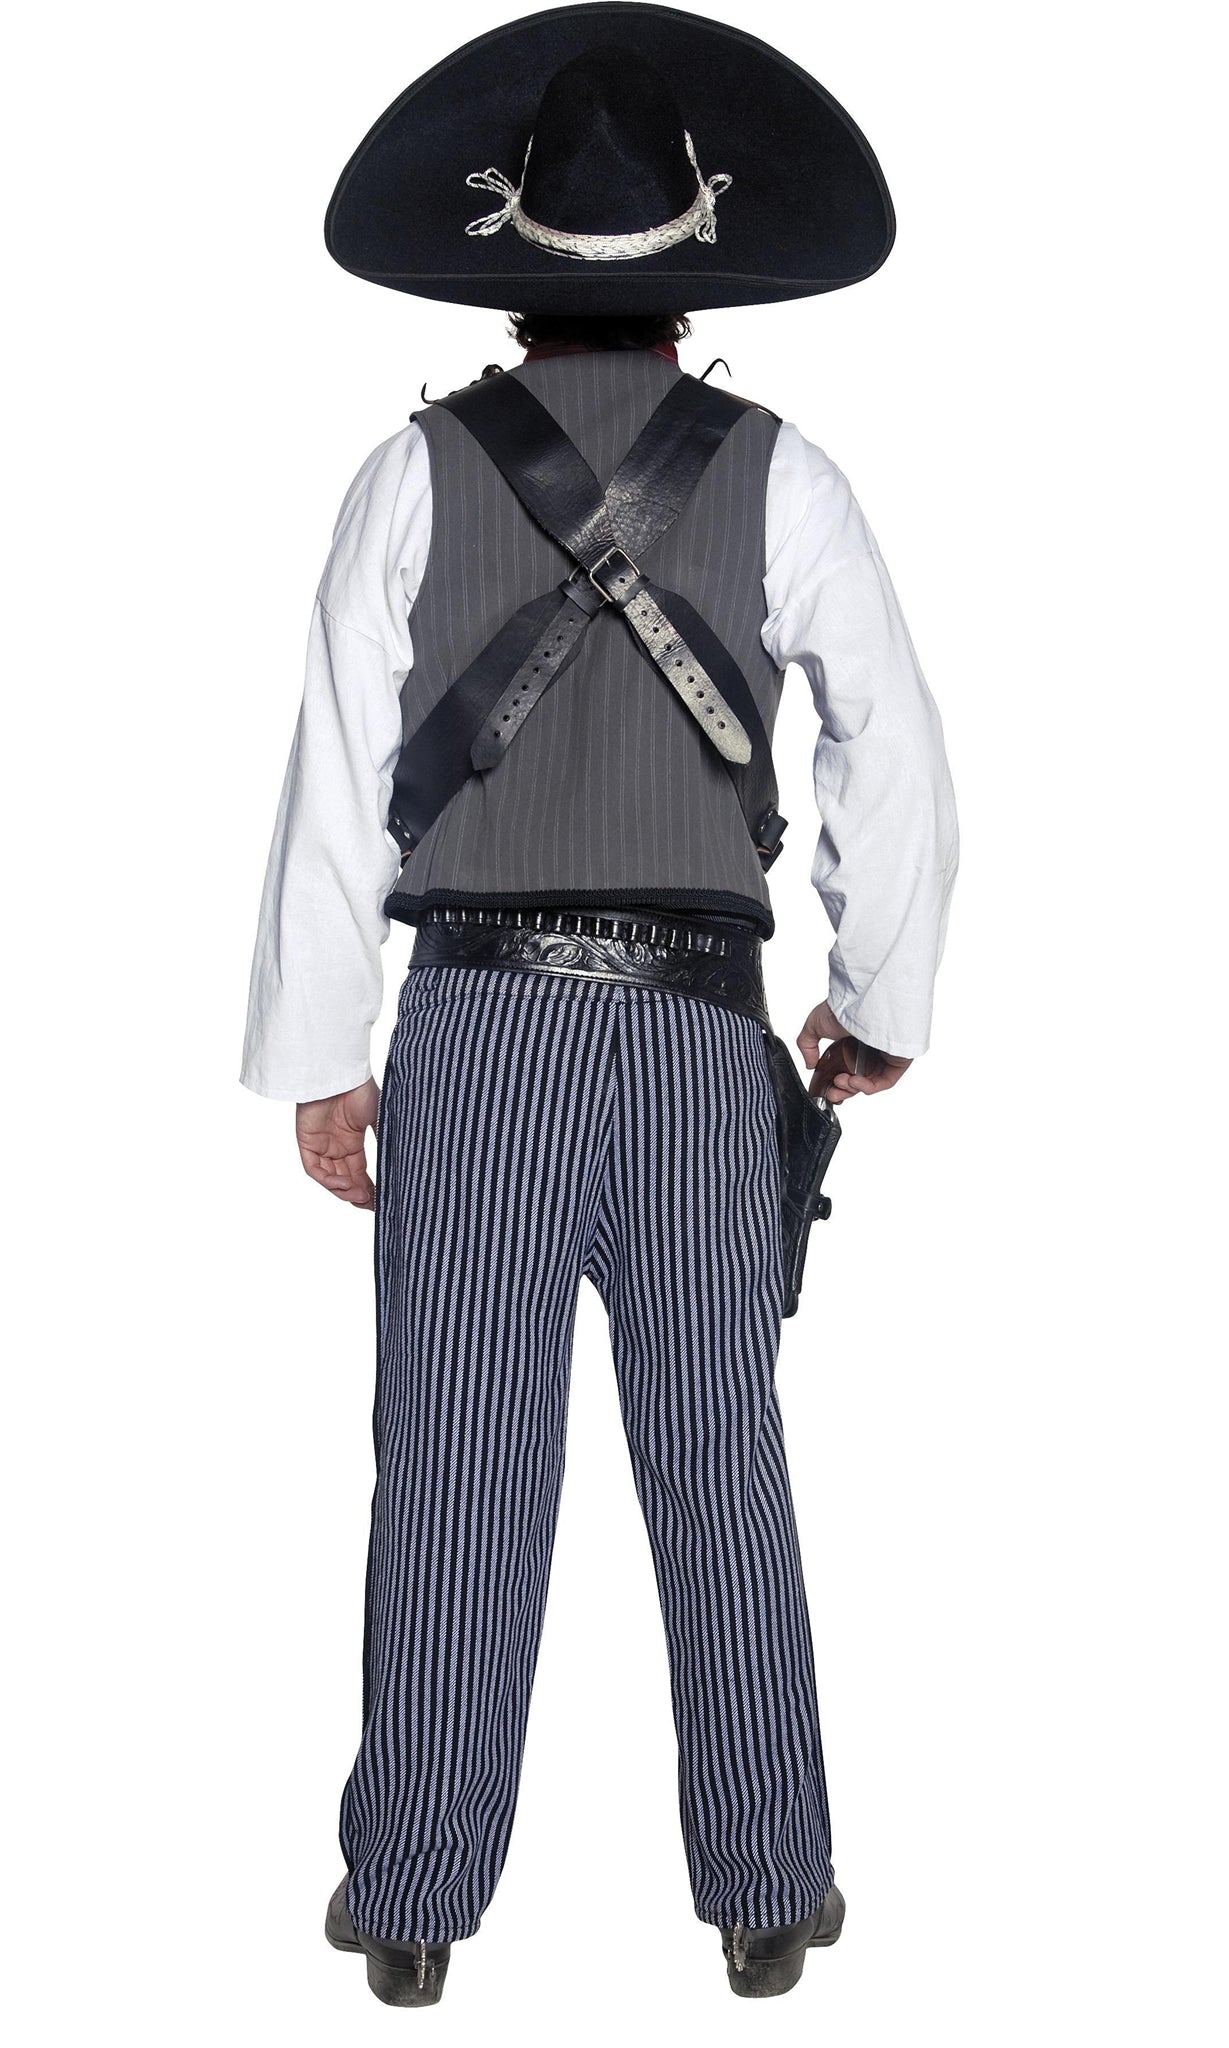 Back of men's Mexican costume with shirt, vest, striped pants and red neck tie